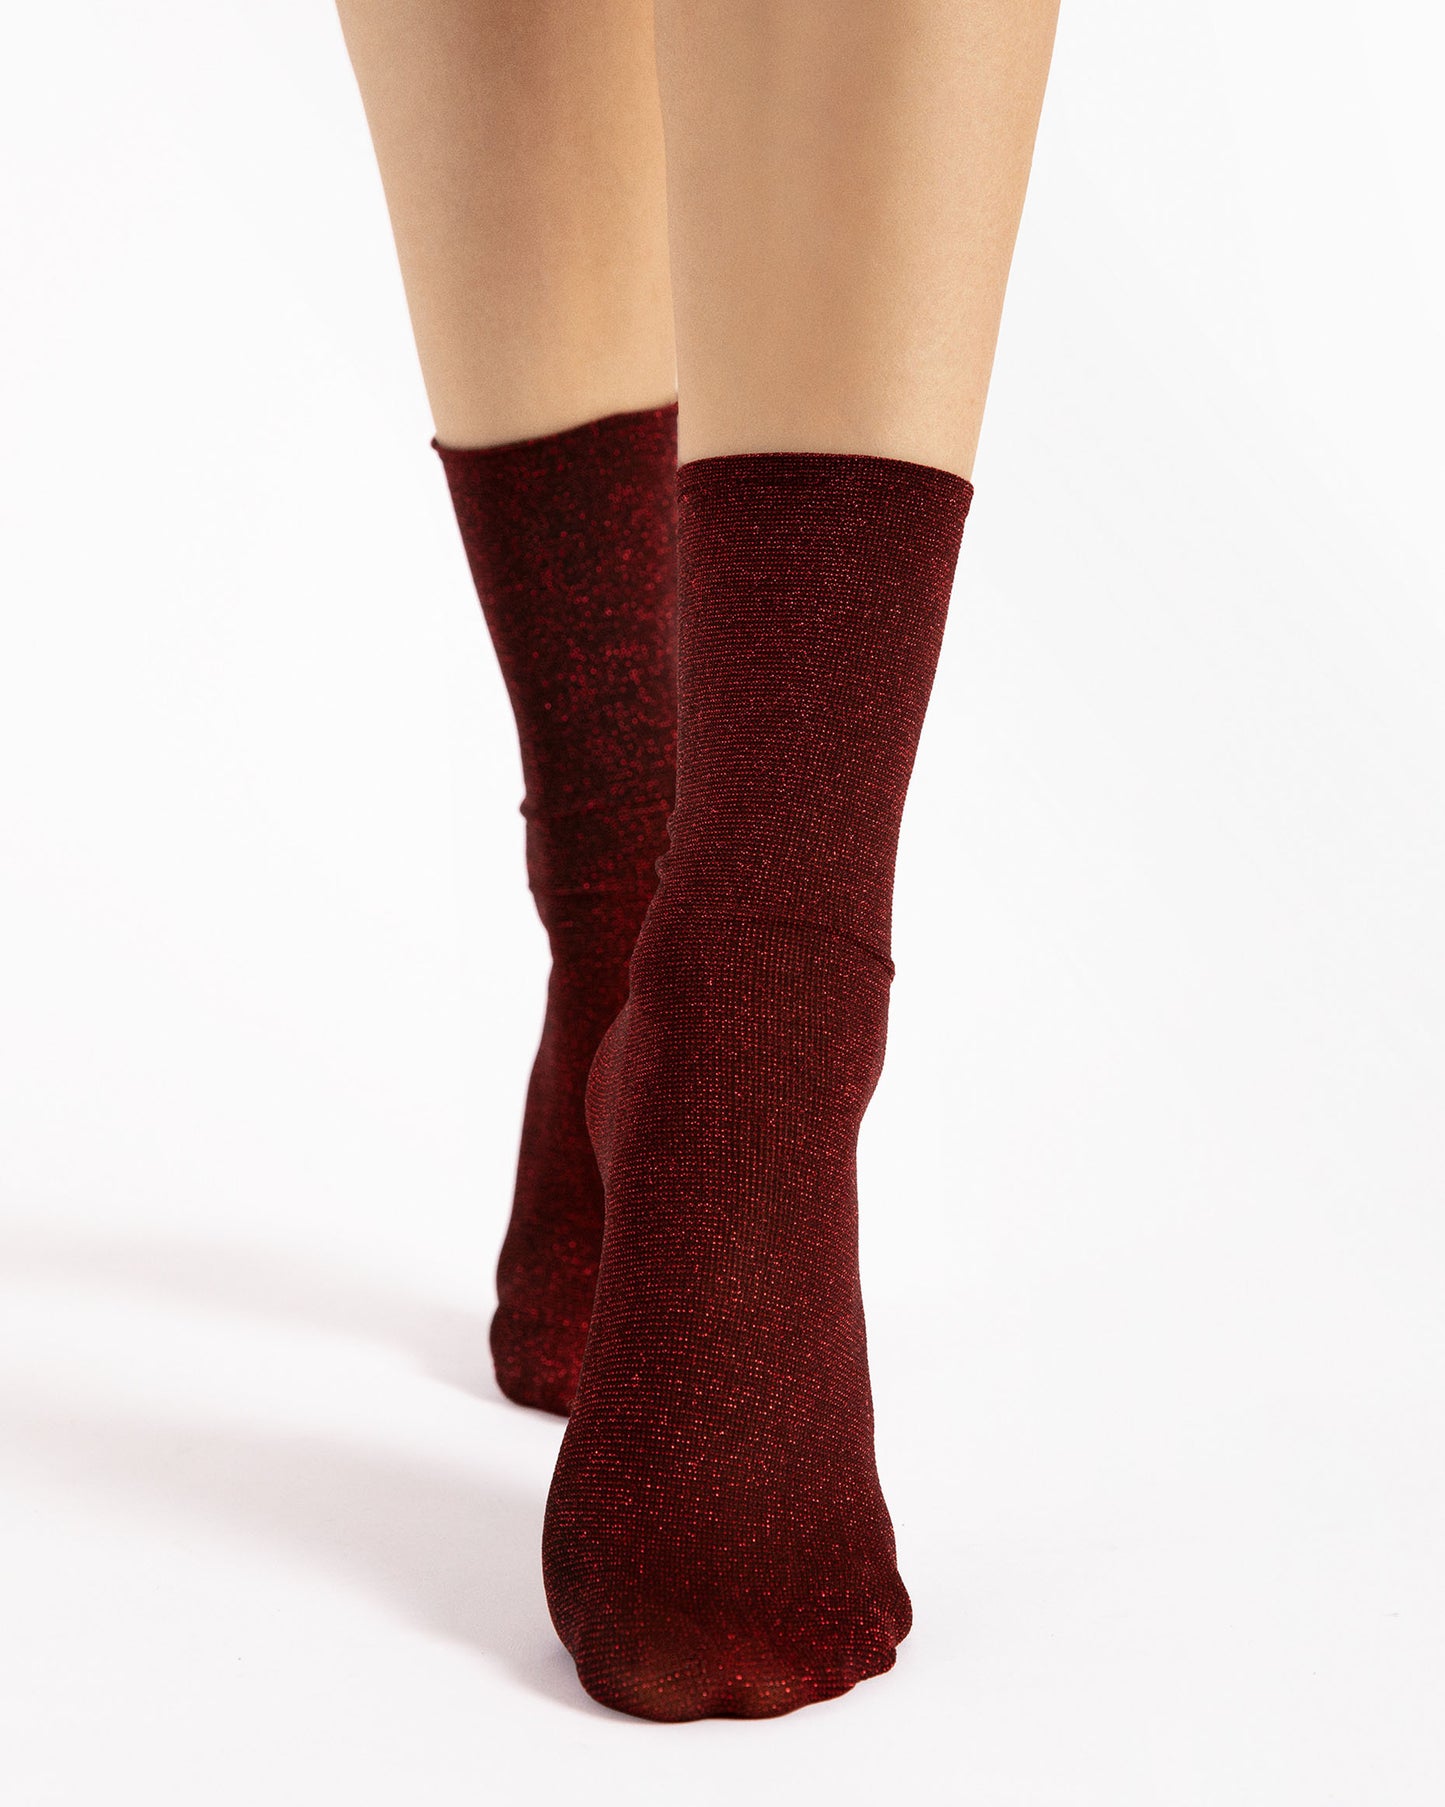 Fiore Bestie Socks - Black opaque tube ankle socks with sparkly wine red lurex woven throughout.